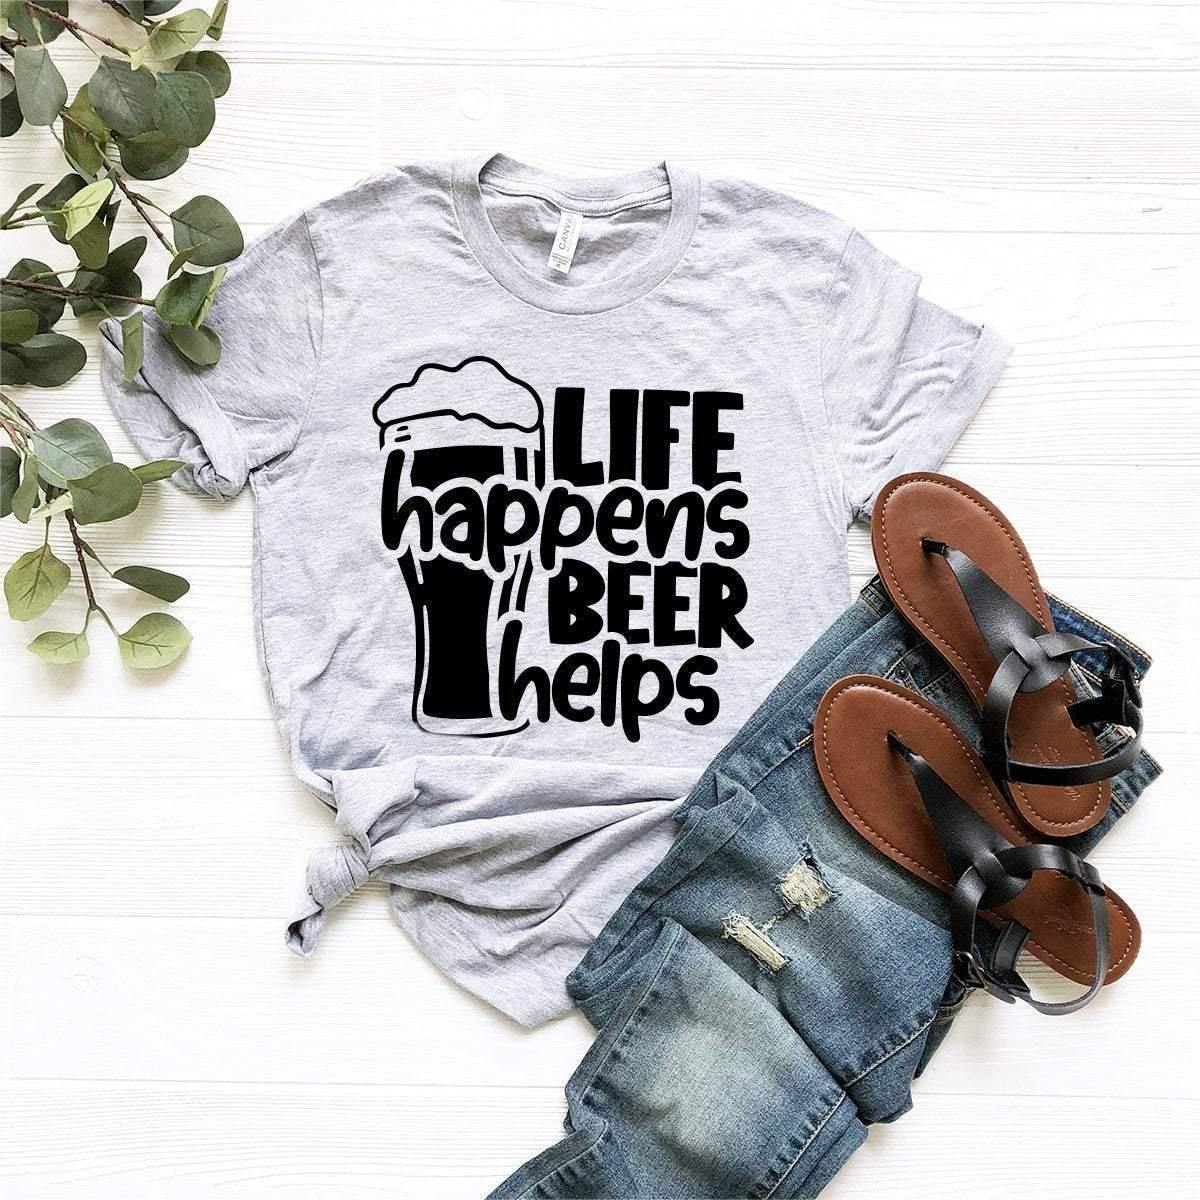 Funny Beer Shirt, Beer T-Shirt, Drinking Shirt, Beer Lover Gift, Beer Drinkers Shirt, Alcoholic Tee, Beer Party Shirt, Beer Gifts - Fastdeliverytees.com